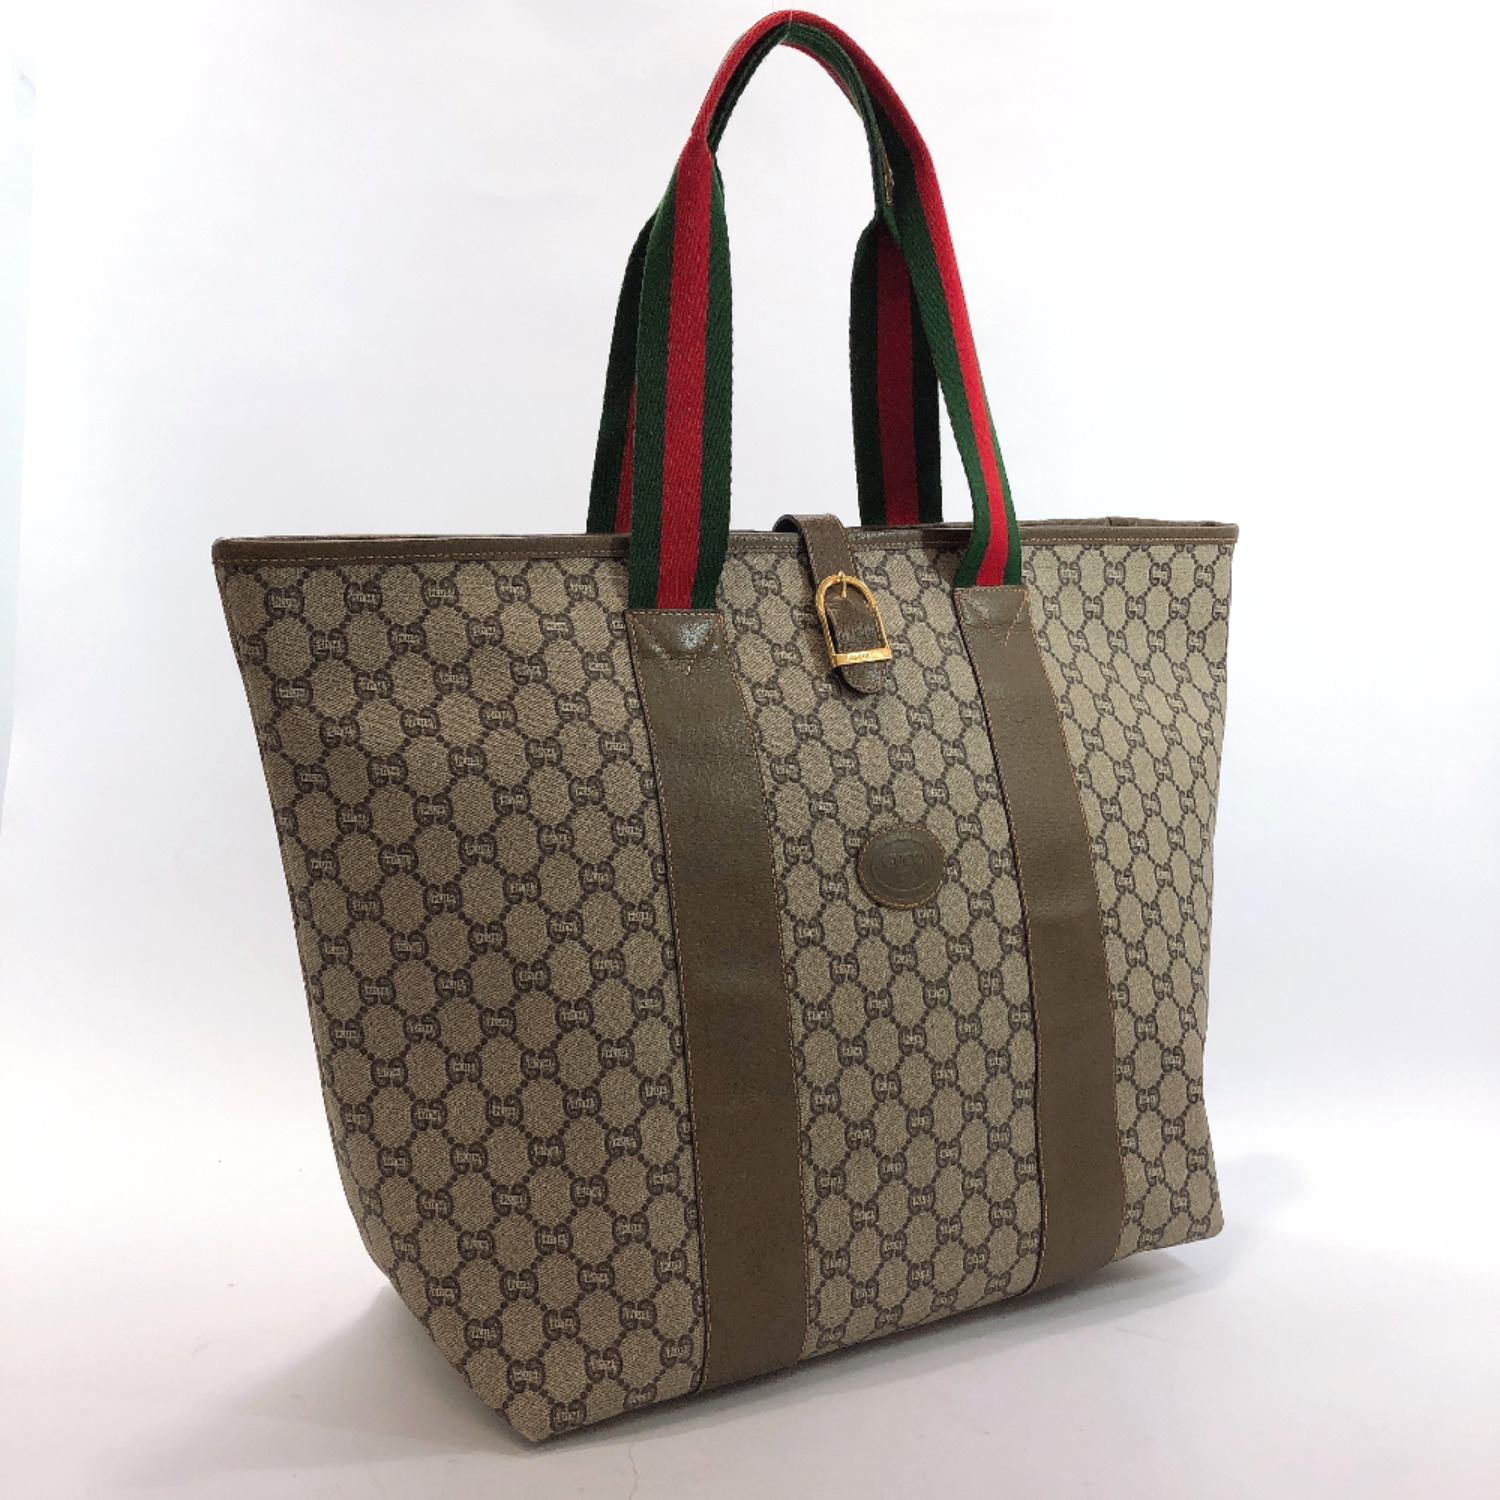 Authentic GUCCI Tote Bag vintage GG PLUS/leather Brown | eBay